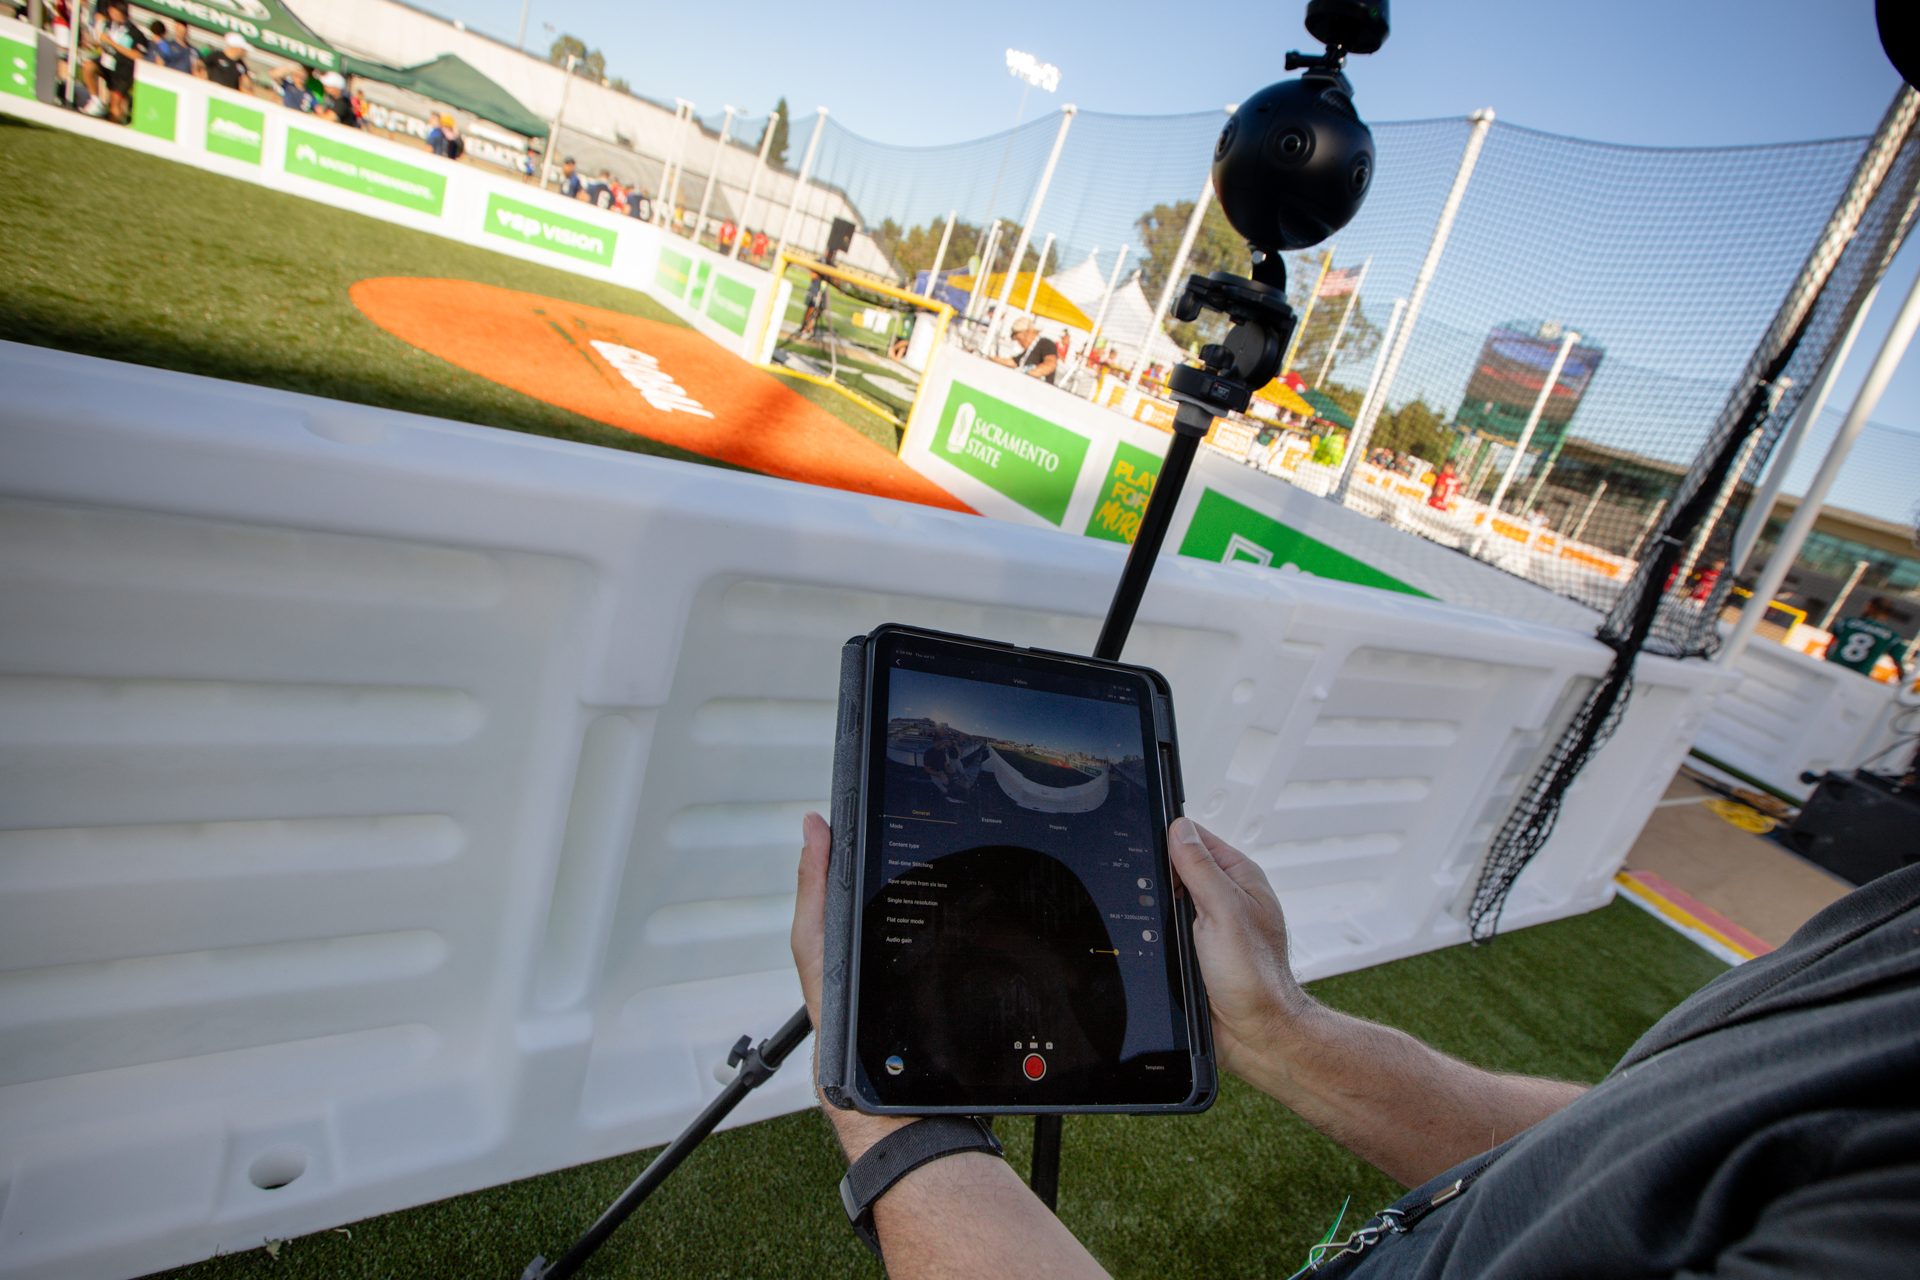 Two hands holding a tablet computer, next to a 3D camera on a tripod, with street soccer fields in the background